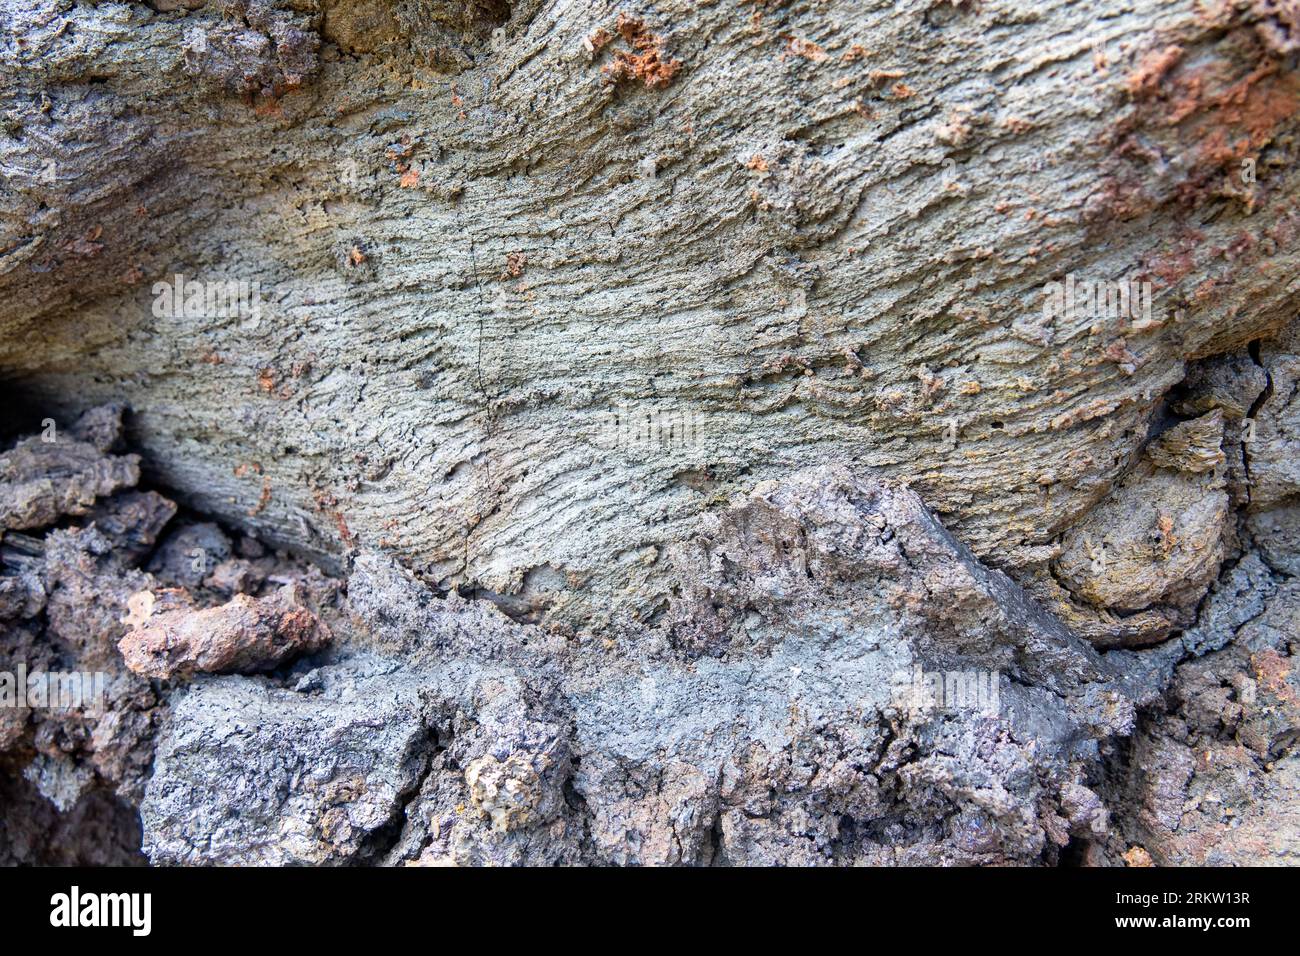 A variety of forms of basalt solidified lava. Viscous volcanic lava cemented with sand, pumice and breccia tephra (volcanic ash). Kamchatka, Russia Stock Photo